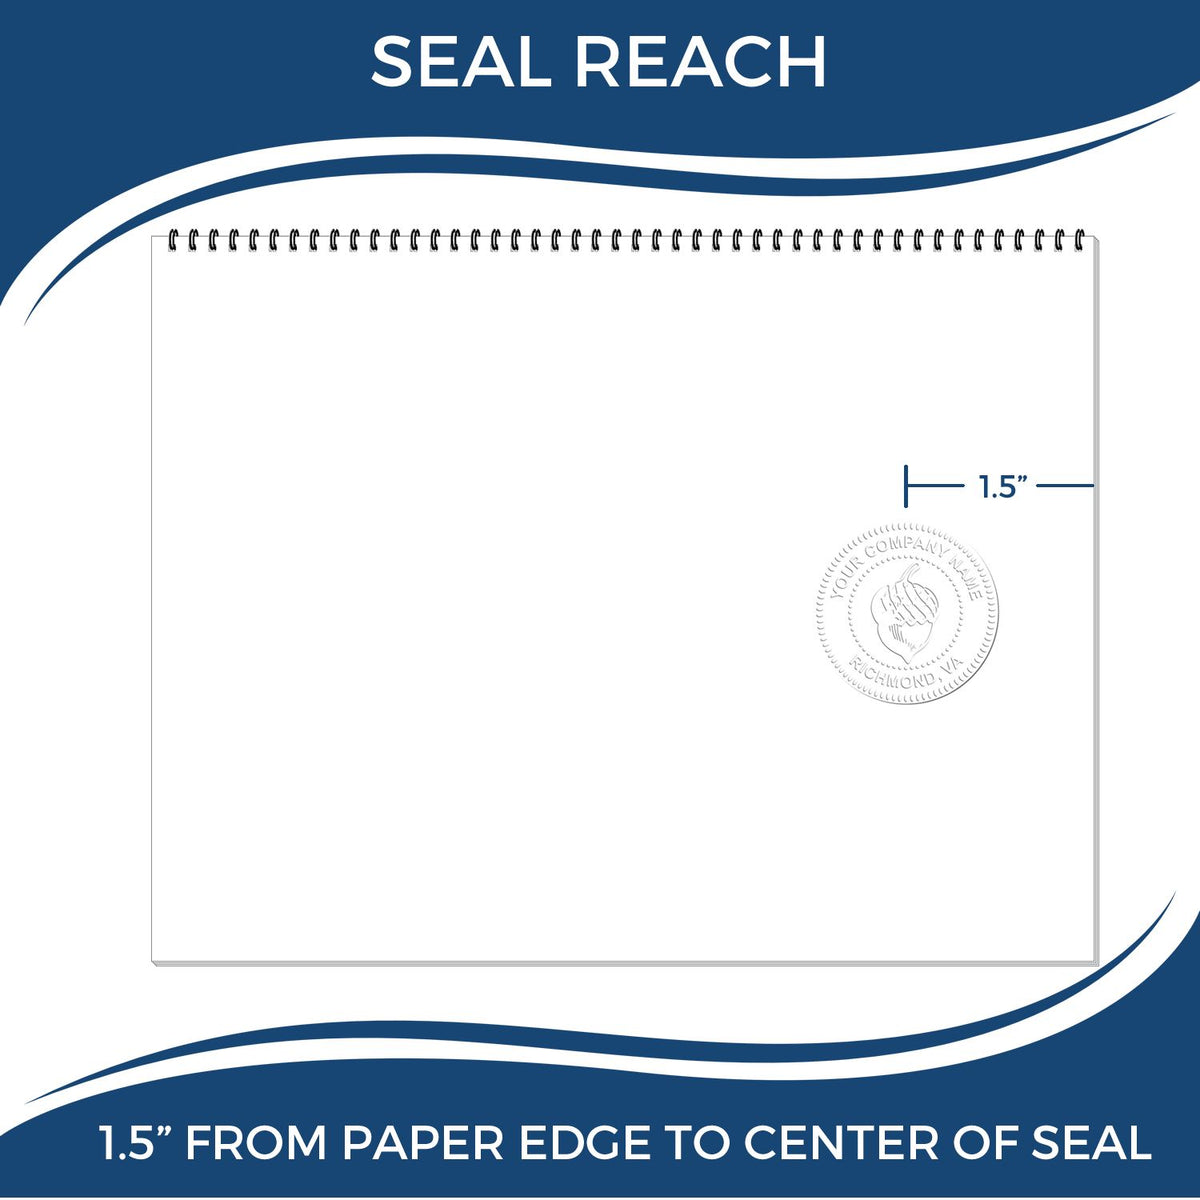 An infographic showing the seal reach which is represented by a ruler and a miniature seal image of the Hybrid Connecticut Landscape Architect Seal